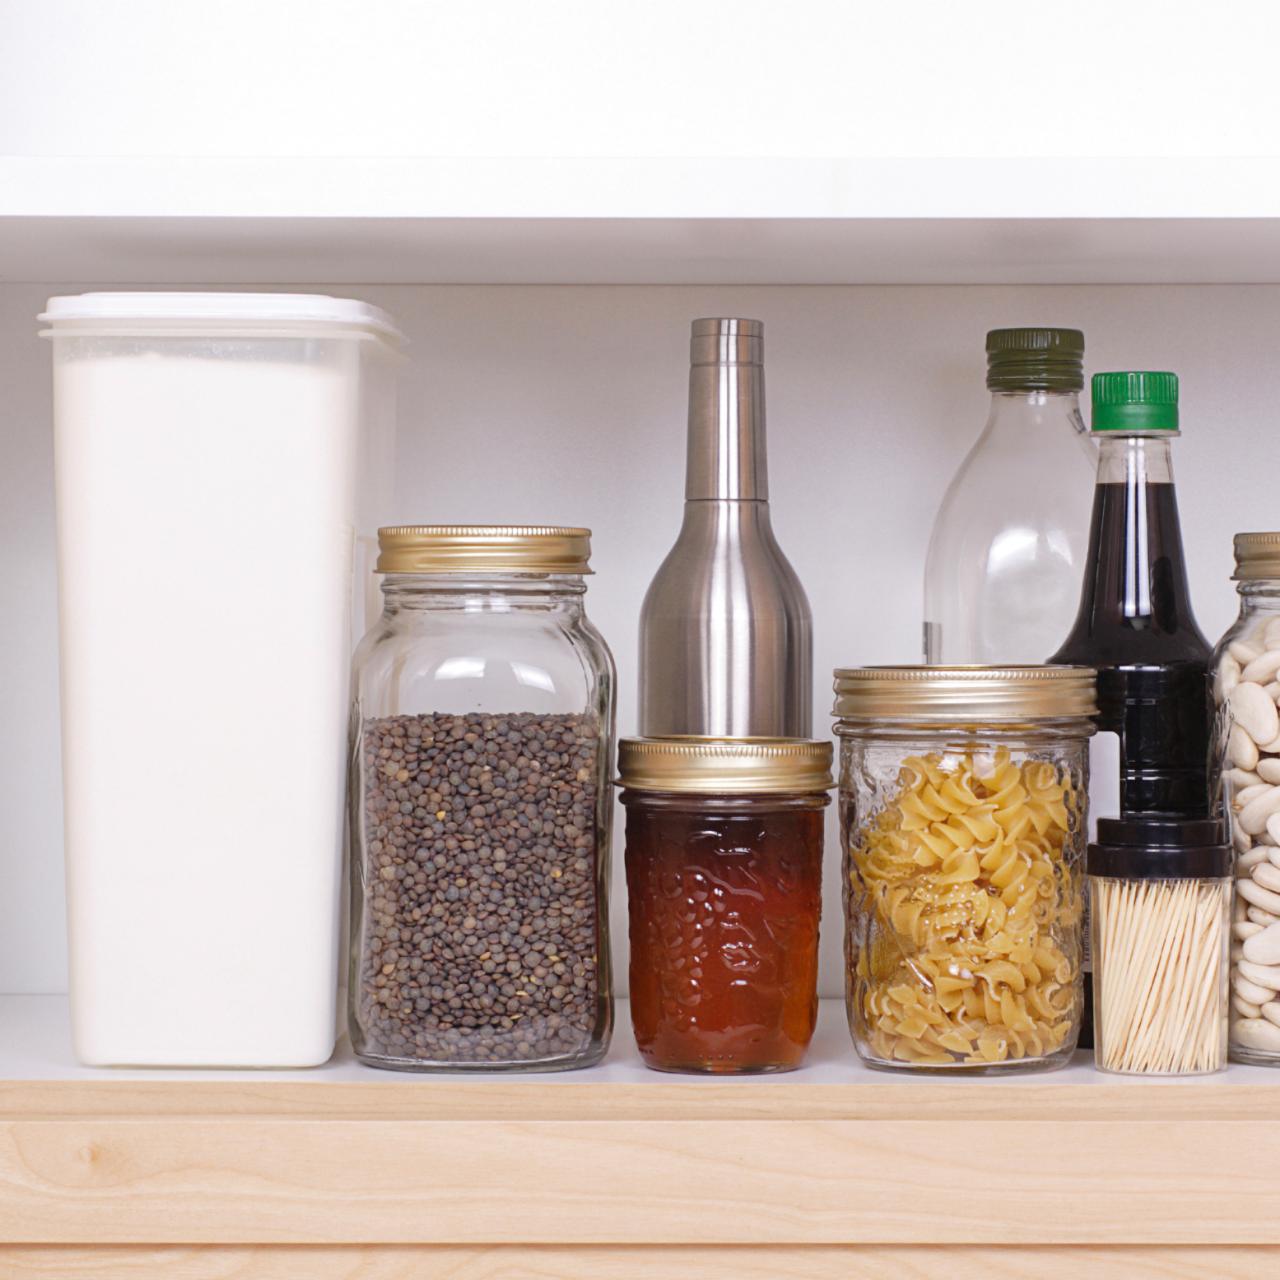 Budget-friendly pantry staples